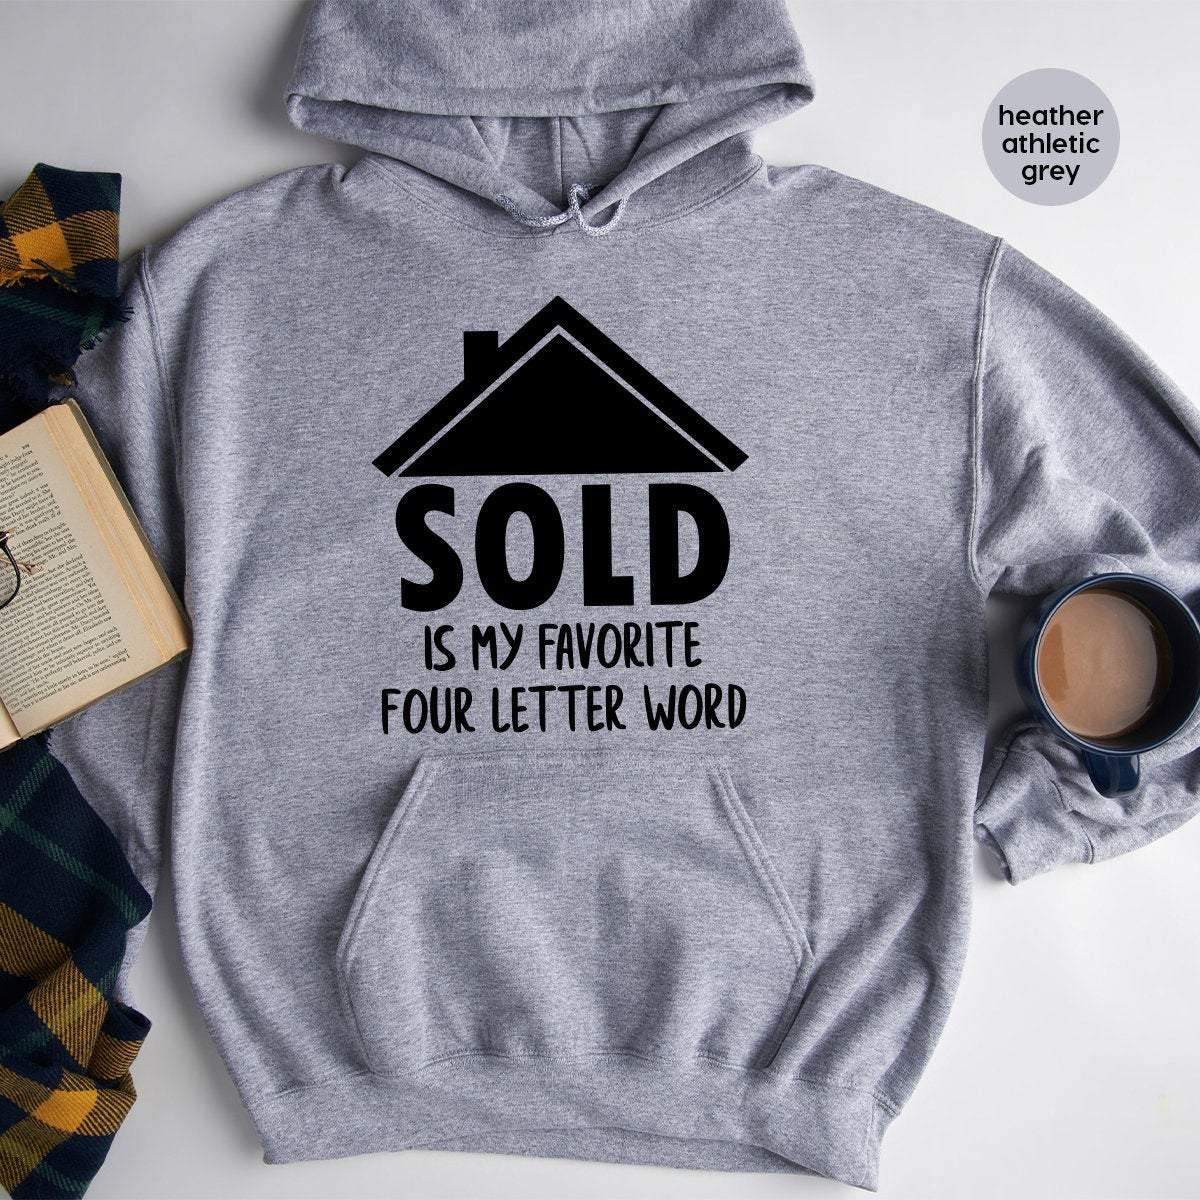 Real Estate Hoodie, Funny Real Estate Hoodie, Real Estate Gift, Sold Is My Favorite 4 Letter Word, Investor Shirt, Home Shirt - Fastdeliverytees.com